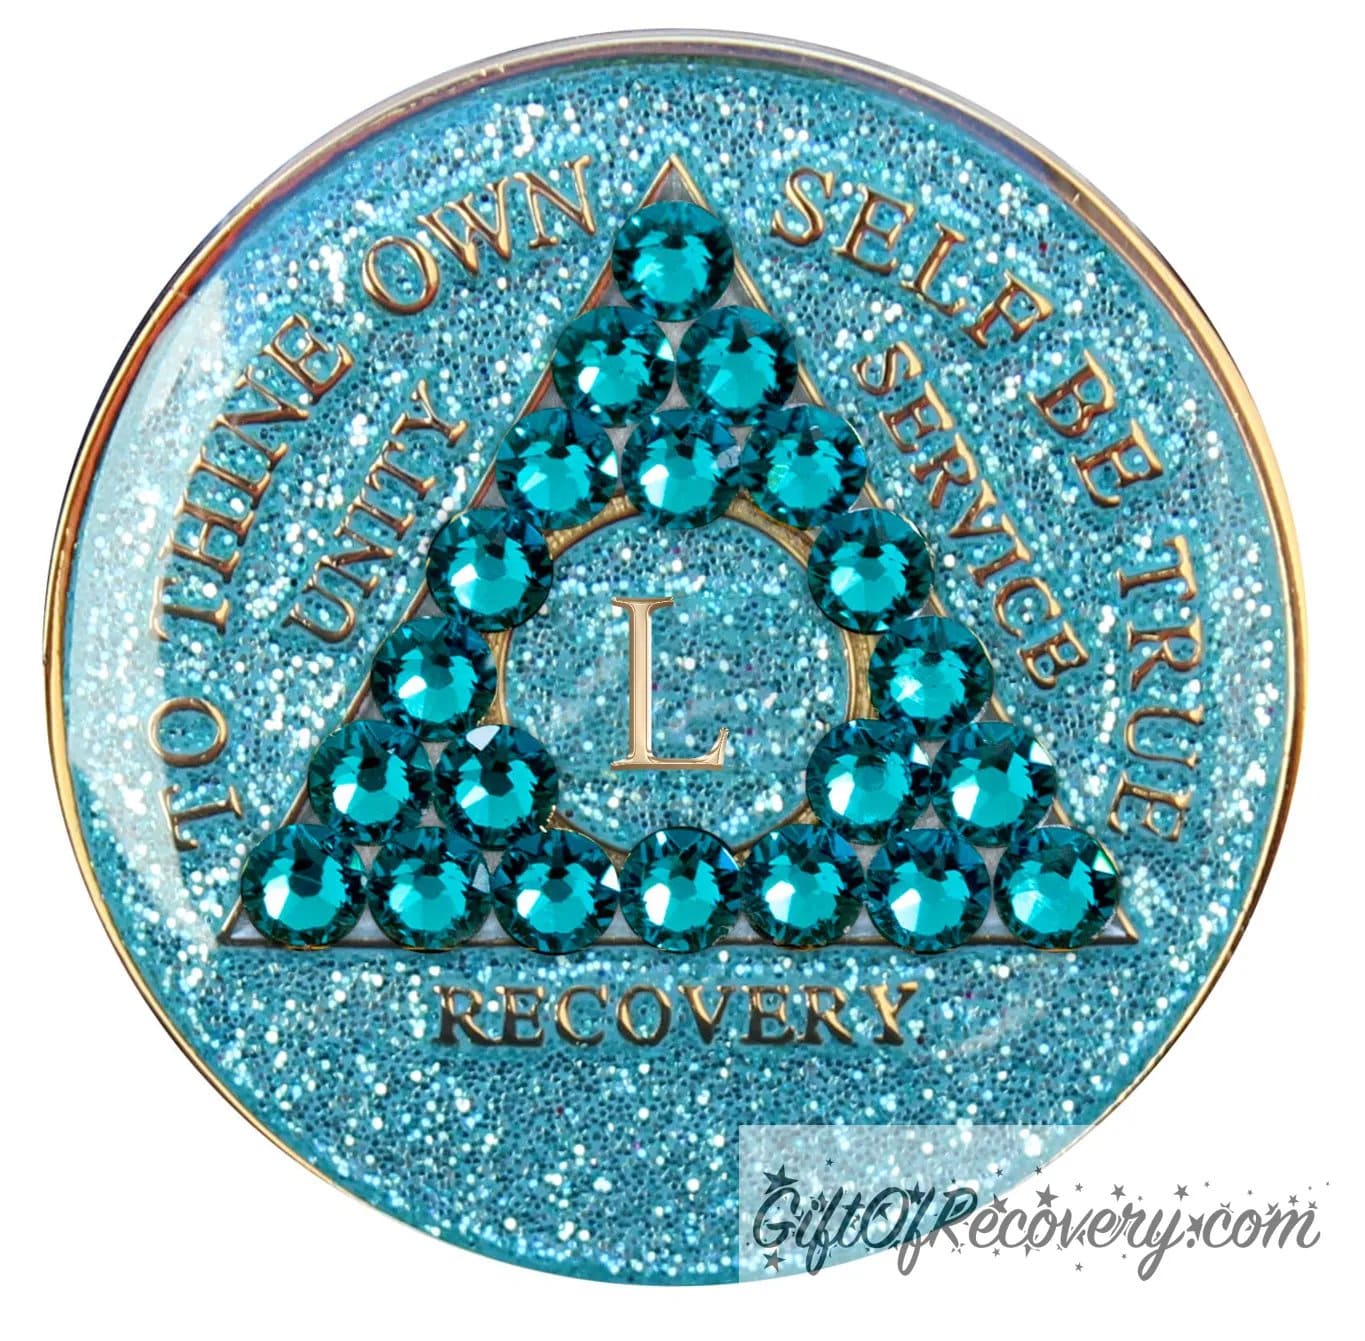 50 year AA medallion in aqua glitter with to thine own self be true, unity, service, recovery, the roman numeral in the center, and the outer rim of the medallion embossed in 14k gold plated brass, the center triangle has 21 genuine blue zircon crystal to give it a sparkle, it is sealed with resin for a shiny finish.